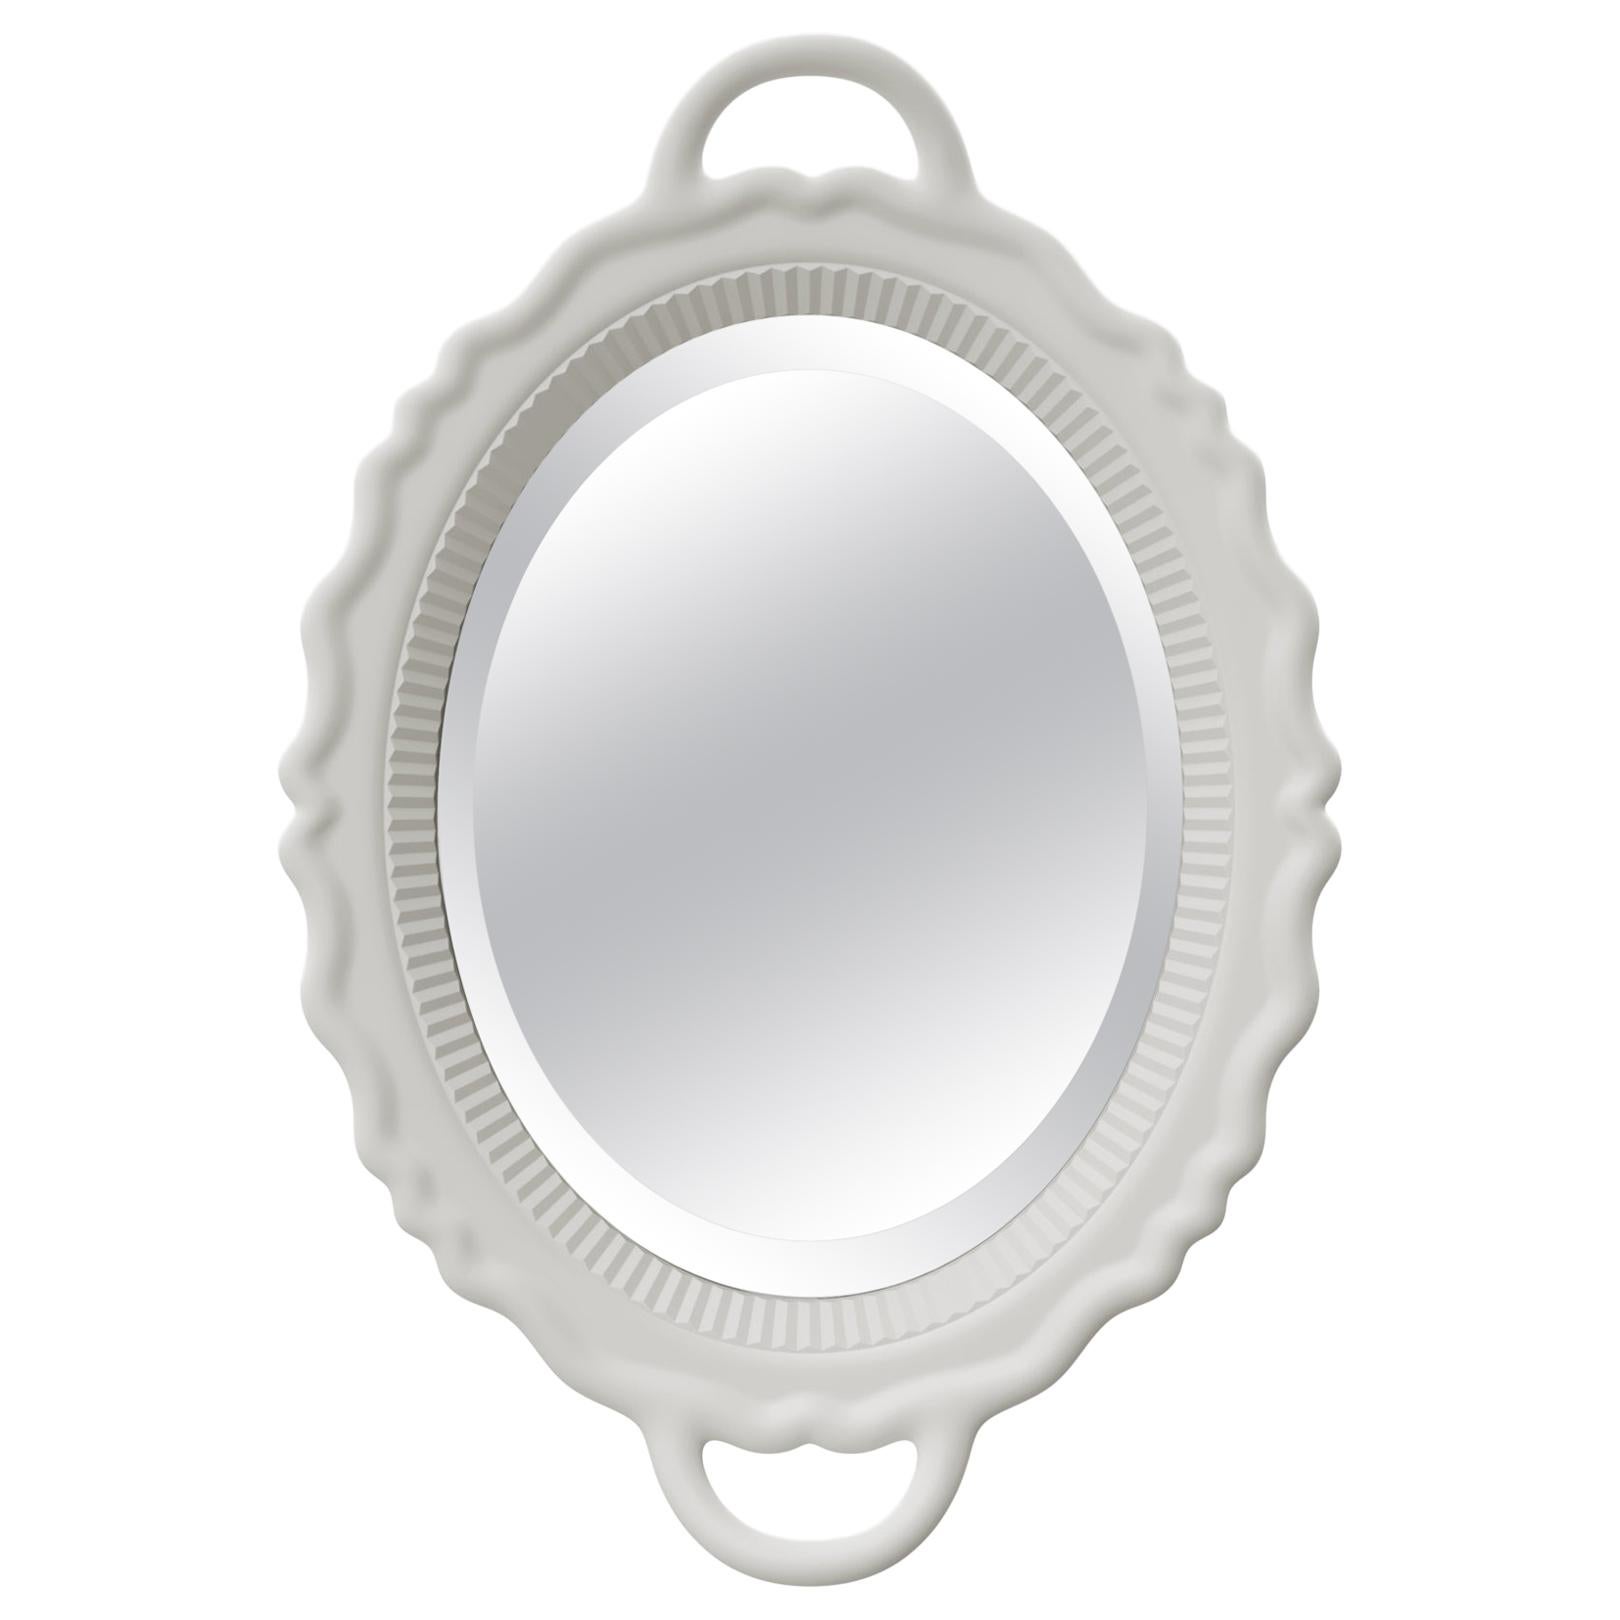 In Stock in Los Angeles, White Plateau Mirror, Designed by Studio Job